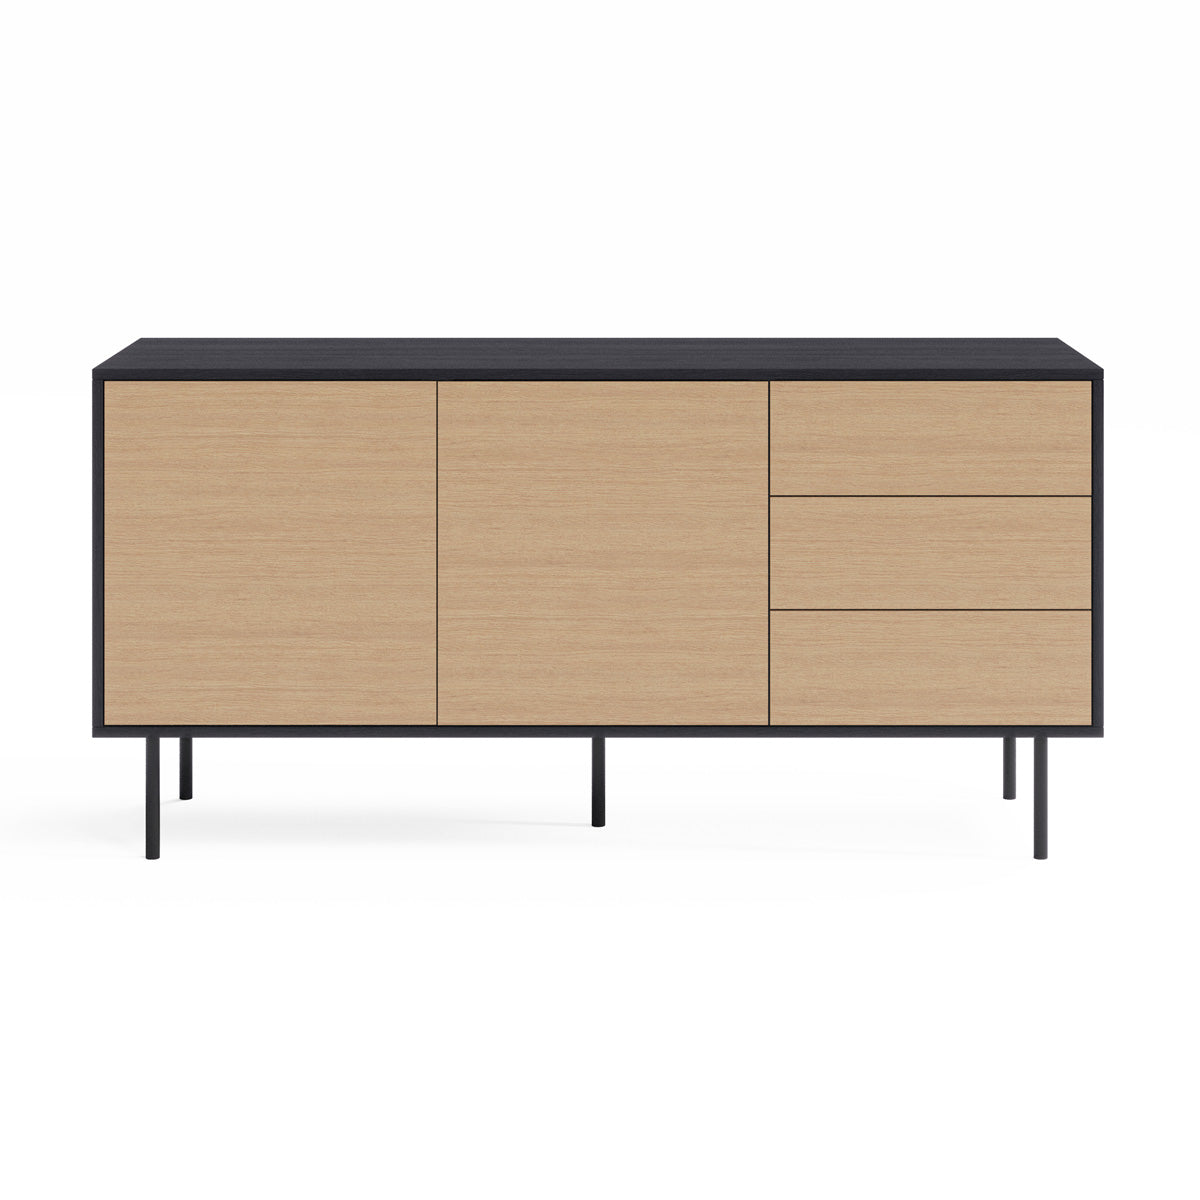 Black Sideboard Buffet Unit with Metal Legs (Harvey Collection)